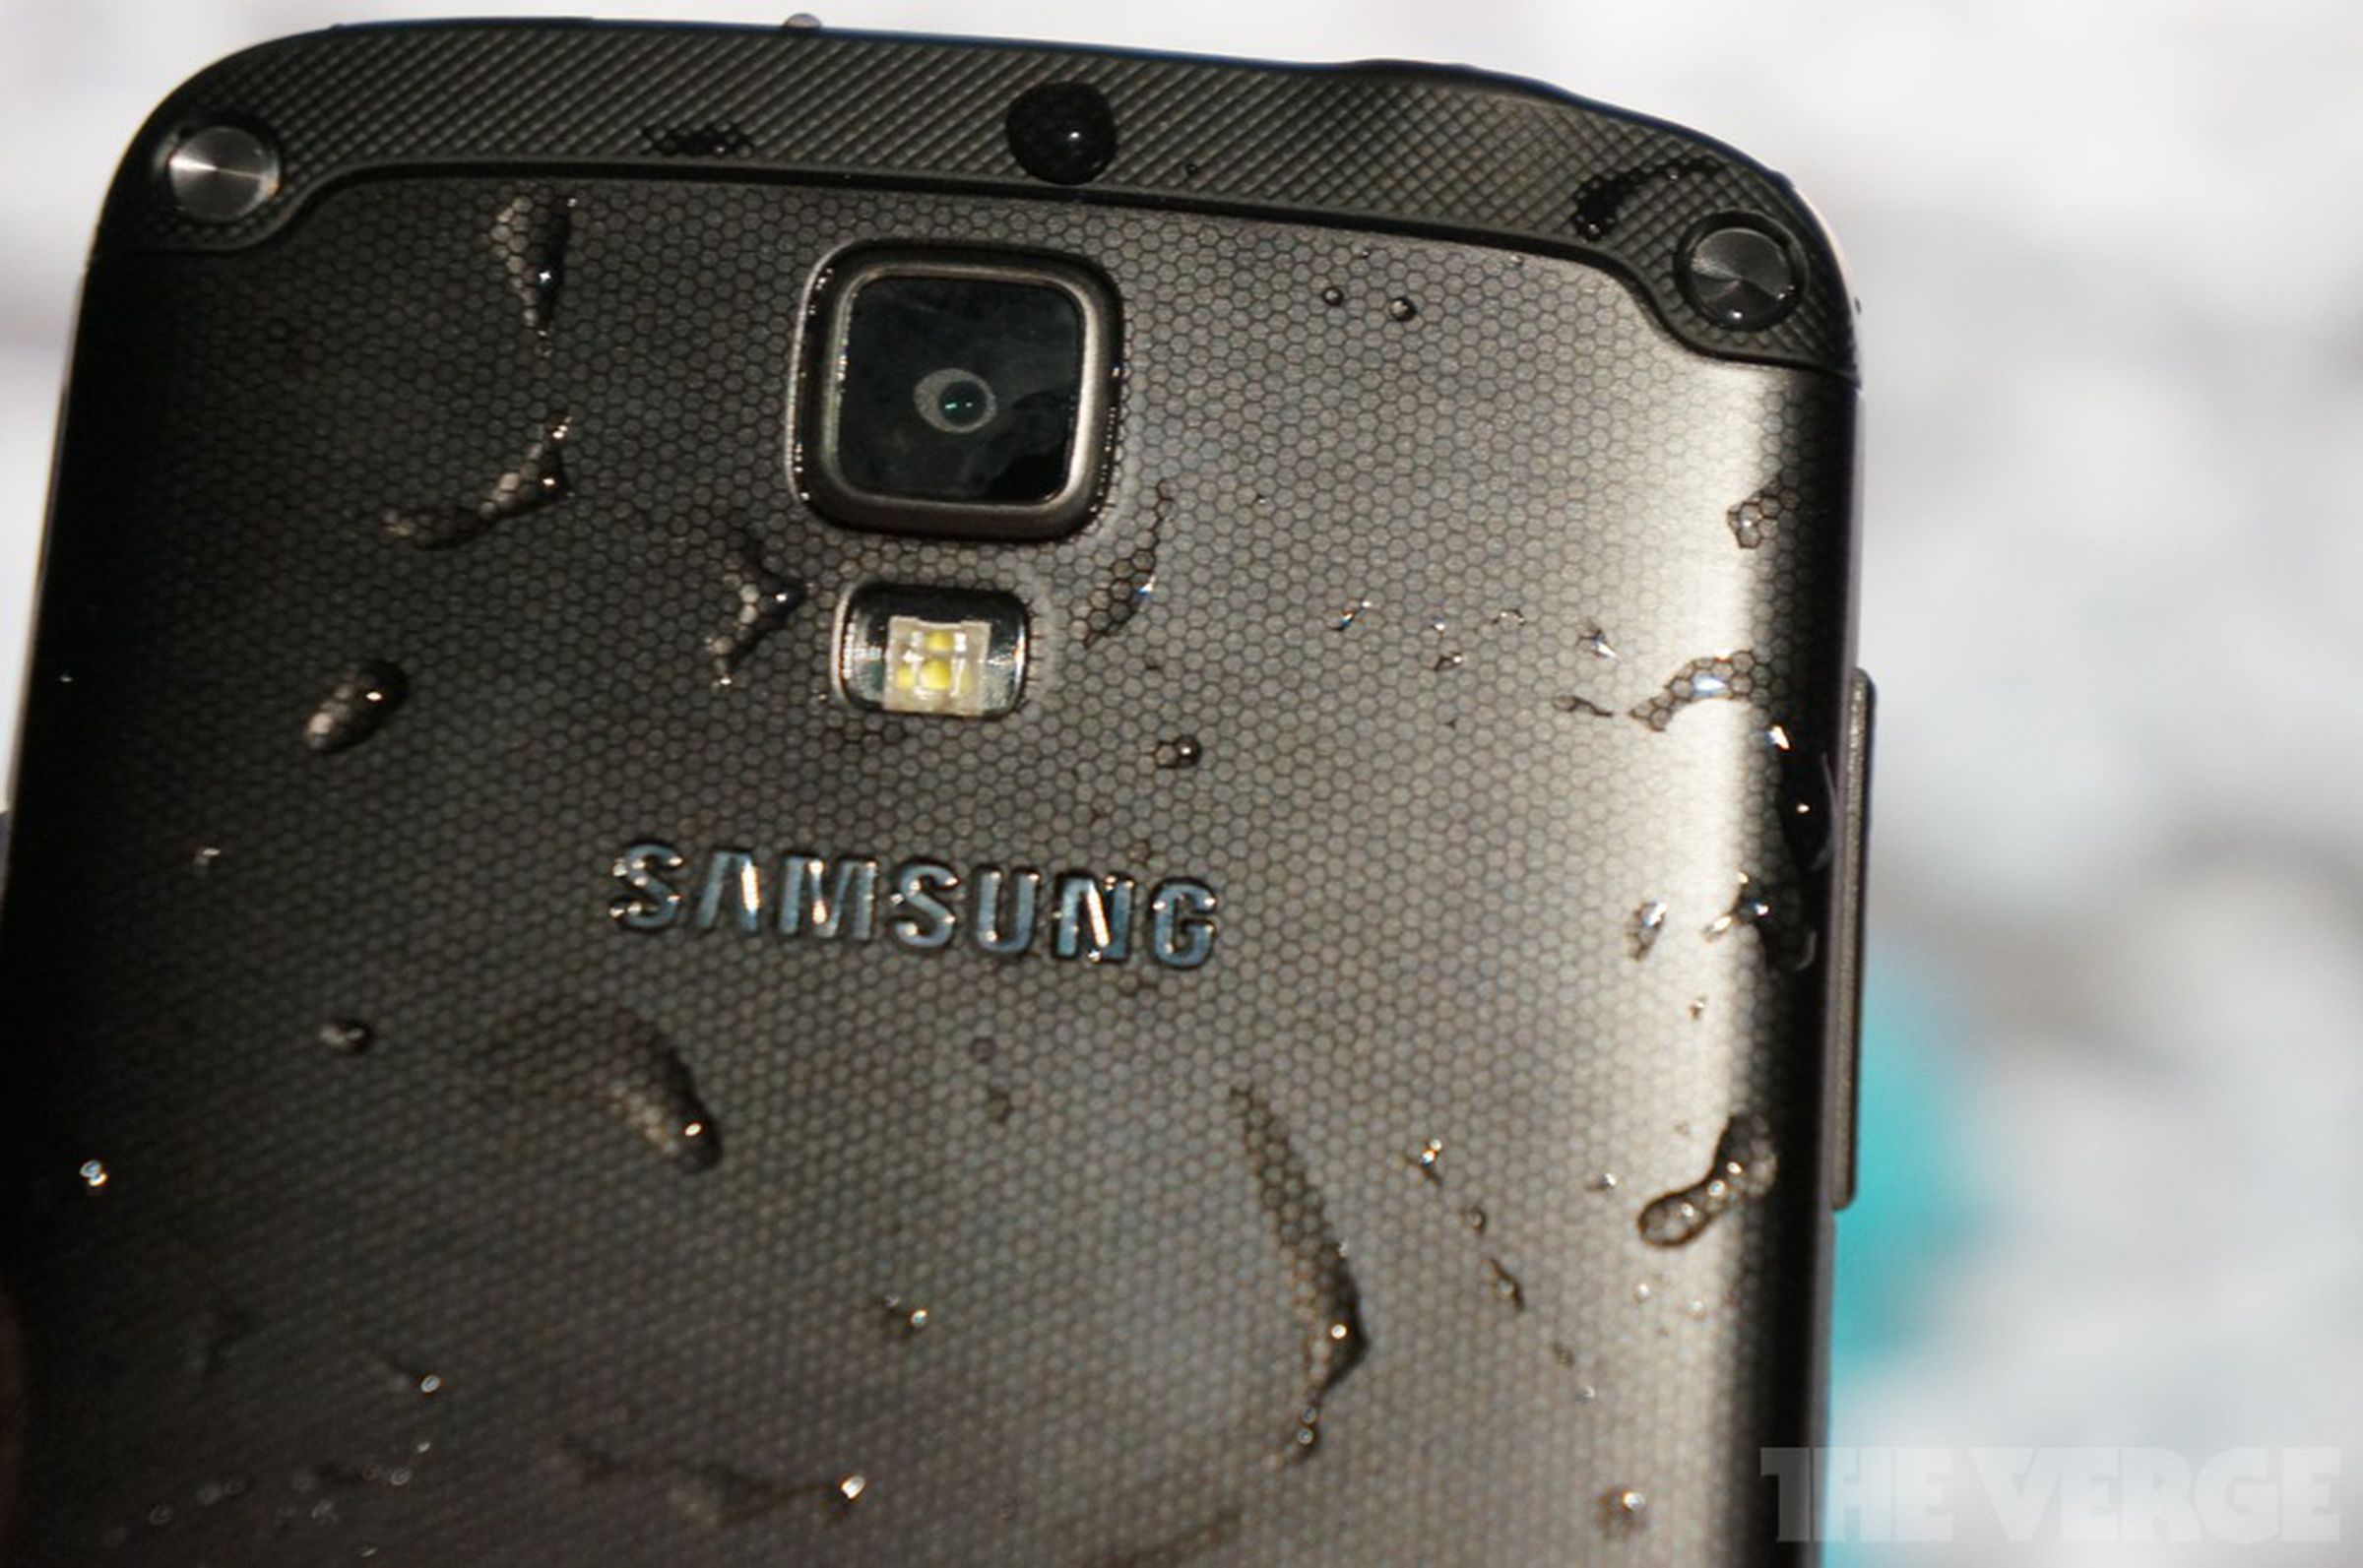 Samsung Galaxy S4 Active hands-on pictures